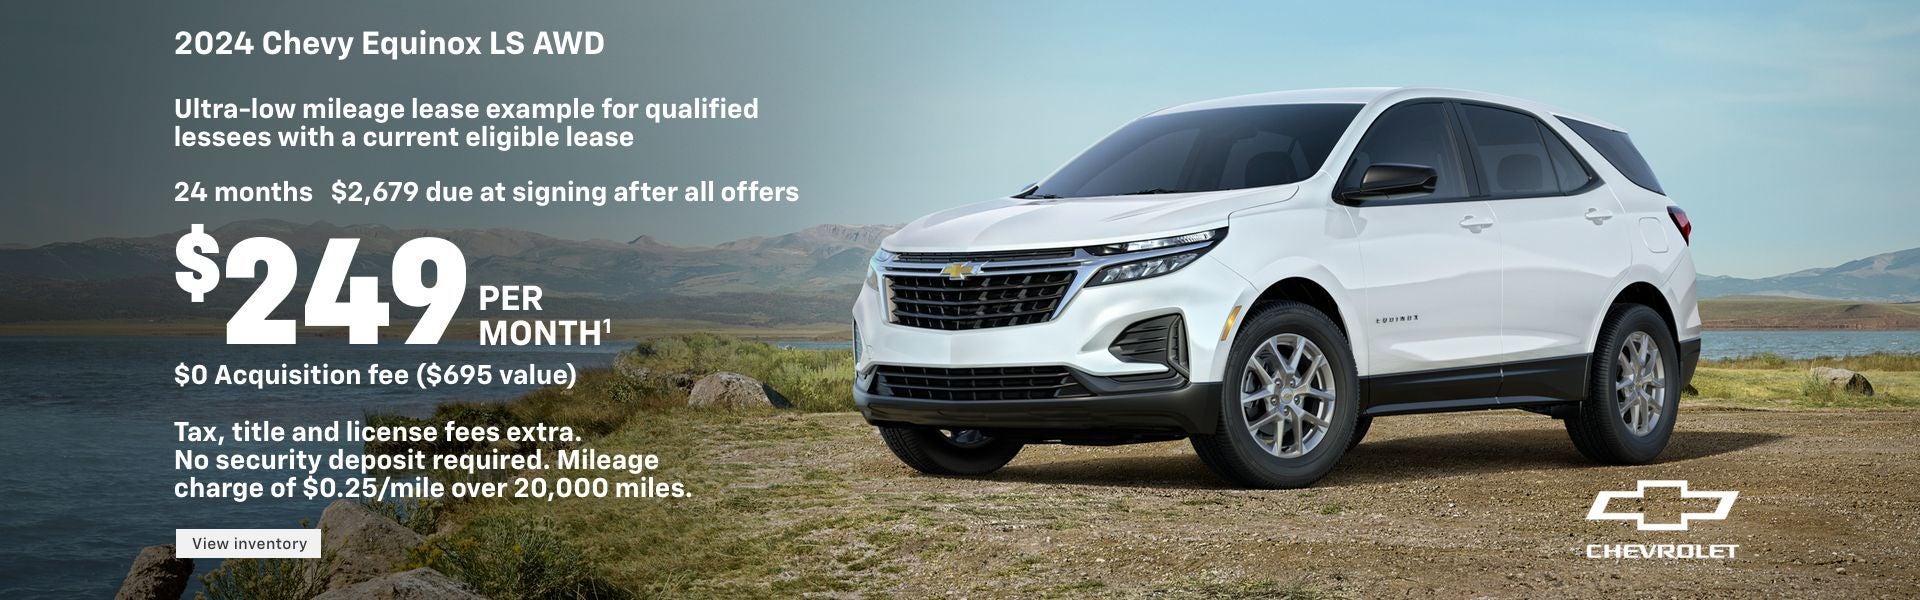 2024 Chevy Equinox LS AWD. Ultra-low mileage lease example for qualified lessees with a current e...